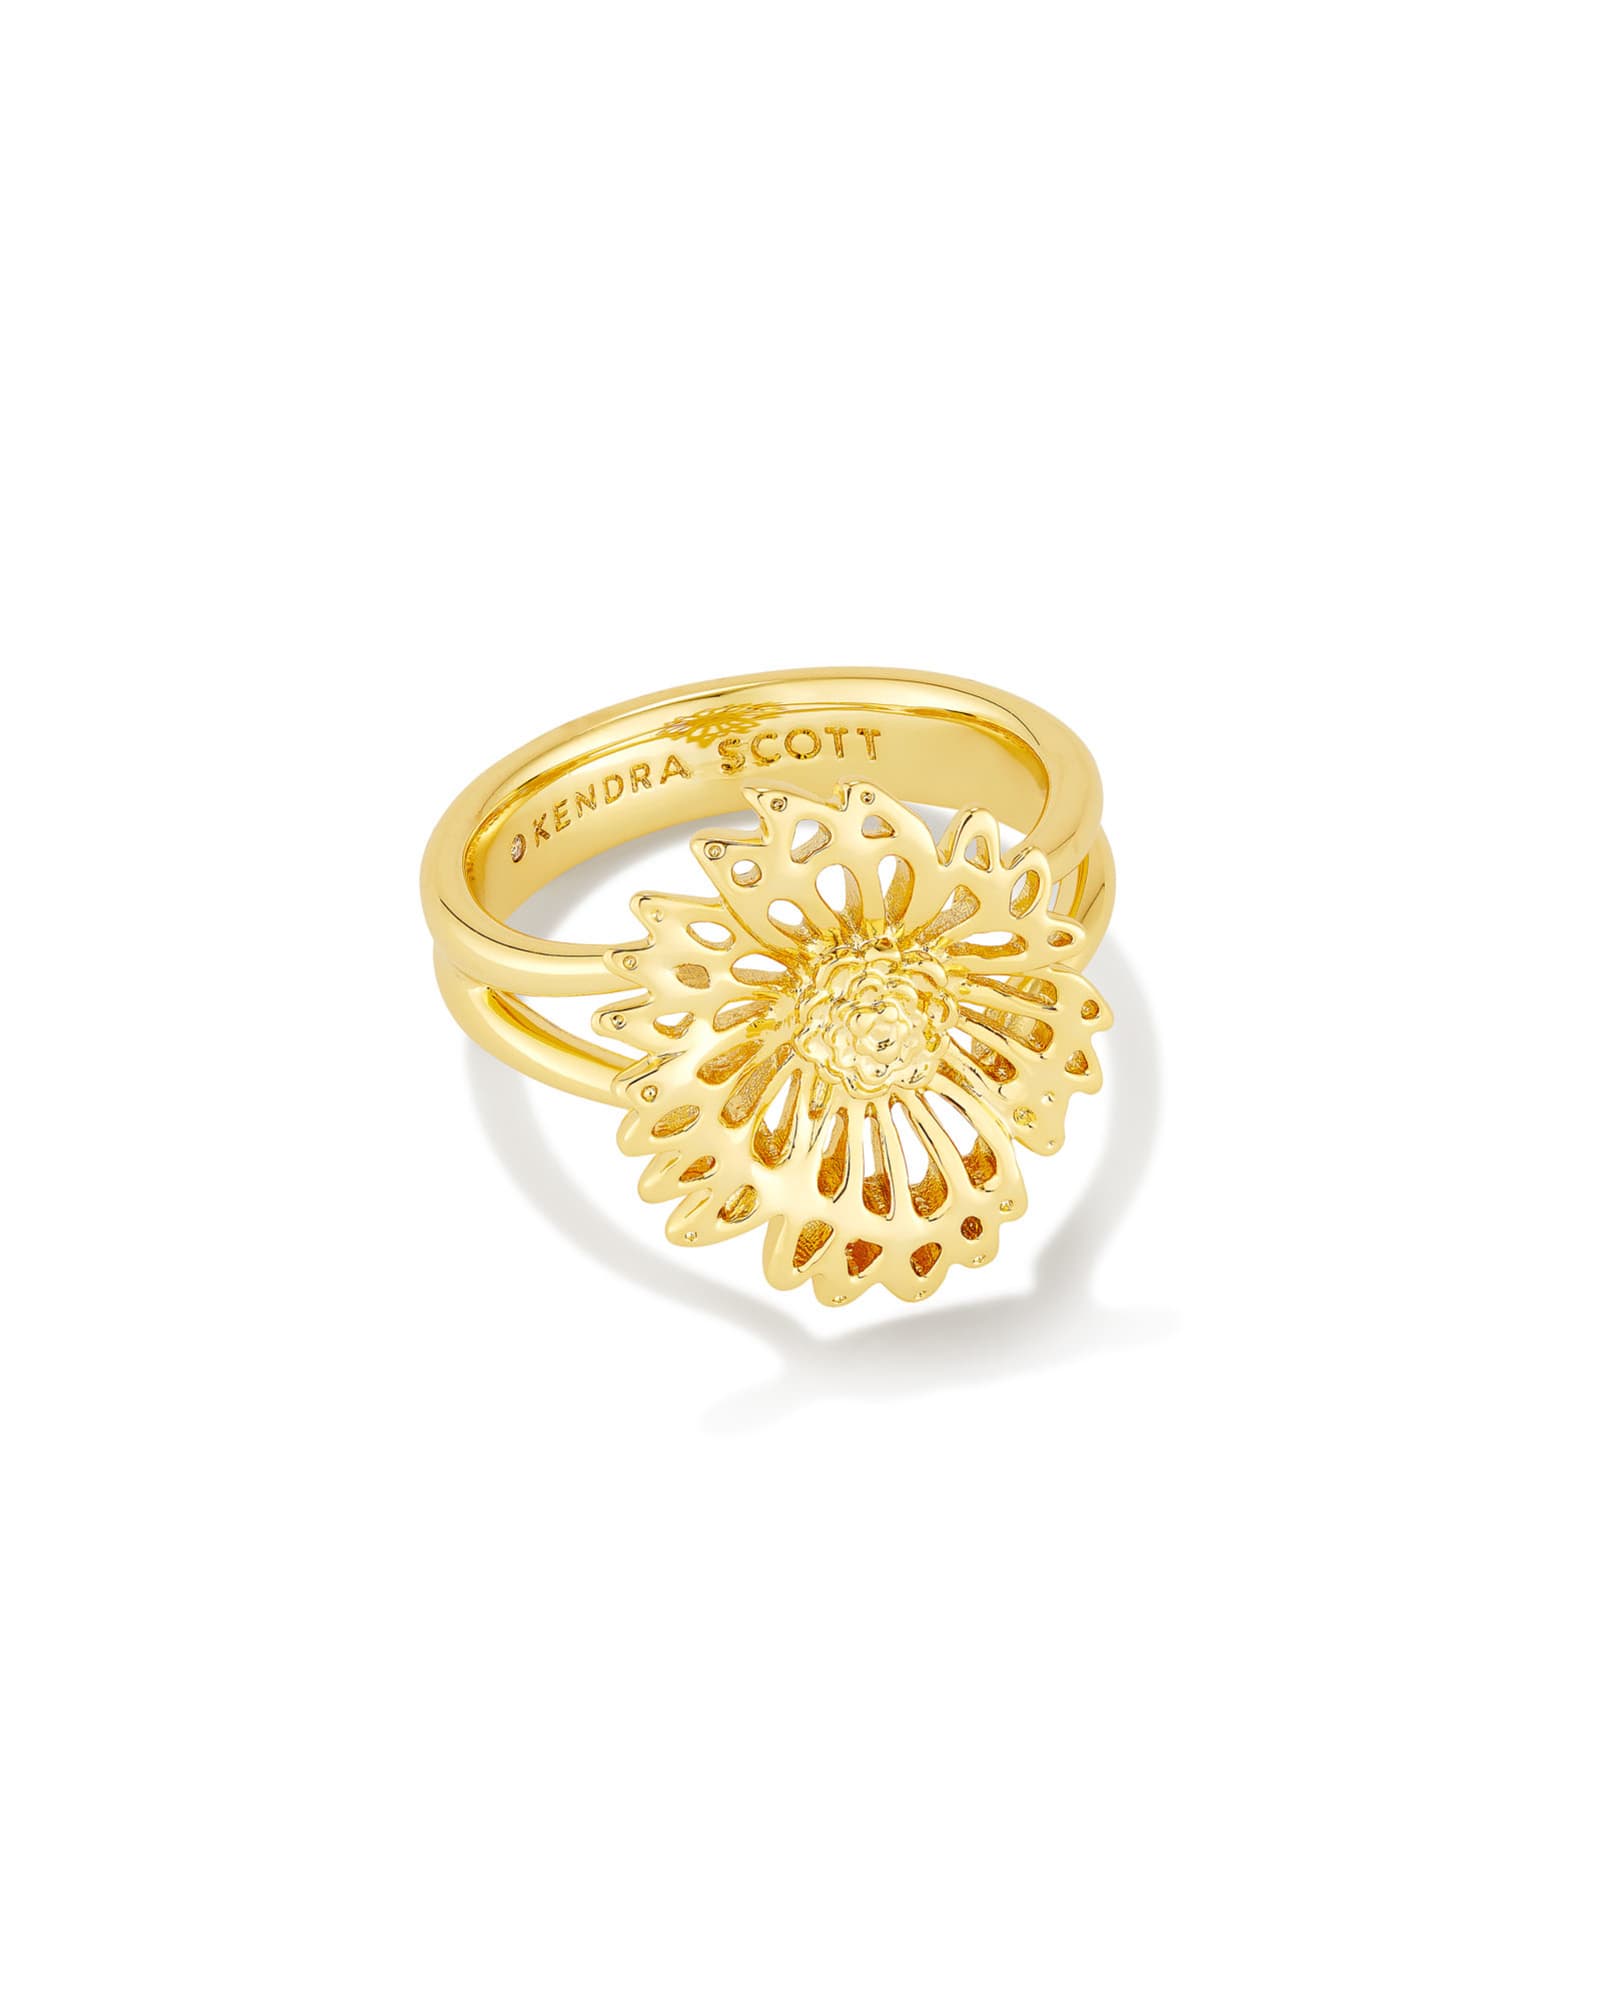 Kendra Scott Brielle Band Ring in Gold | Plated Brass